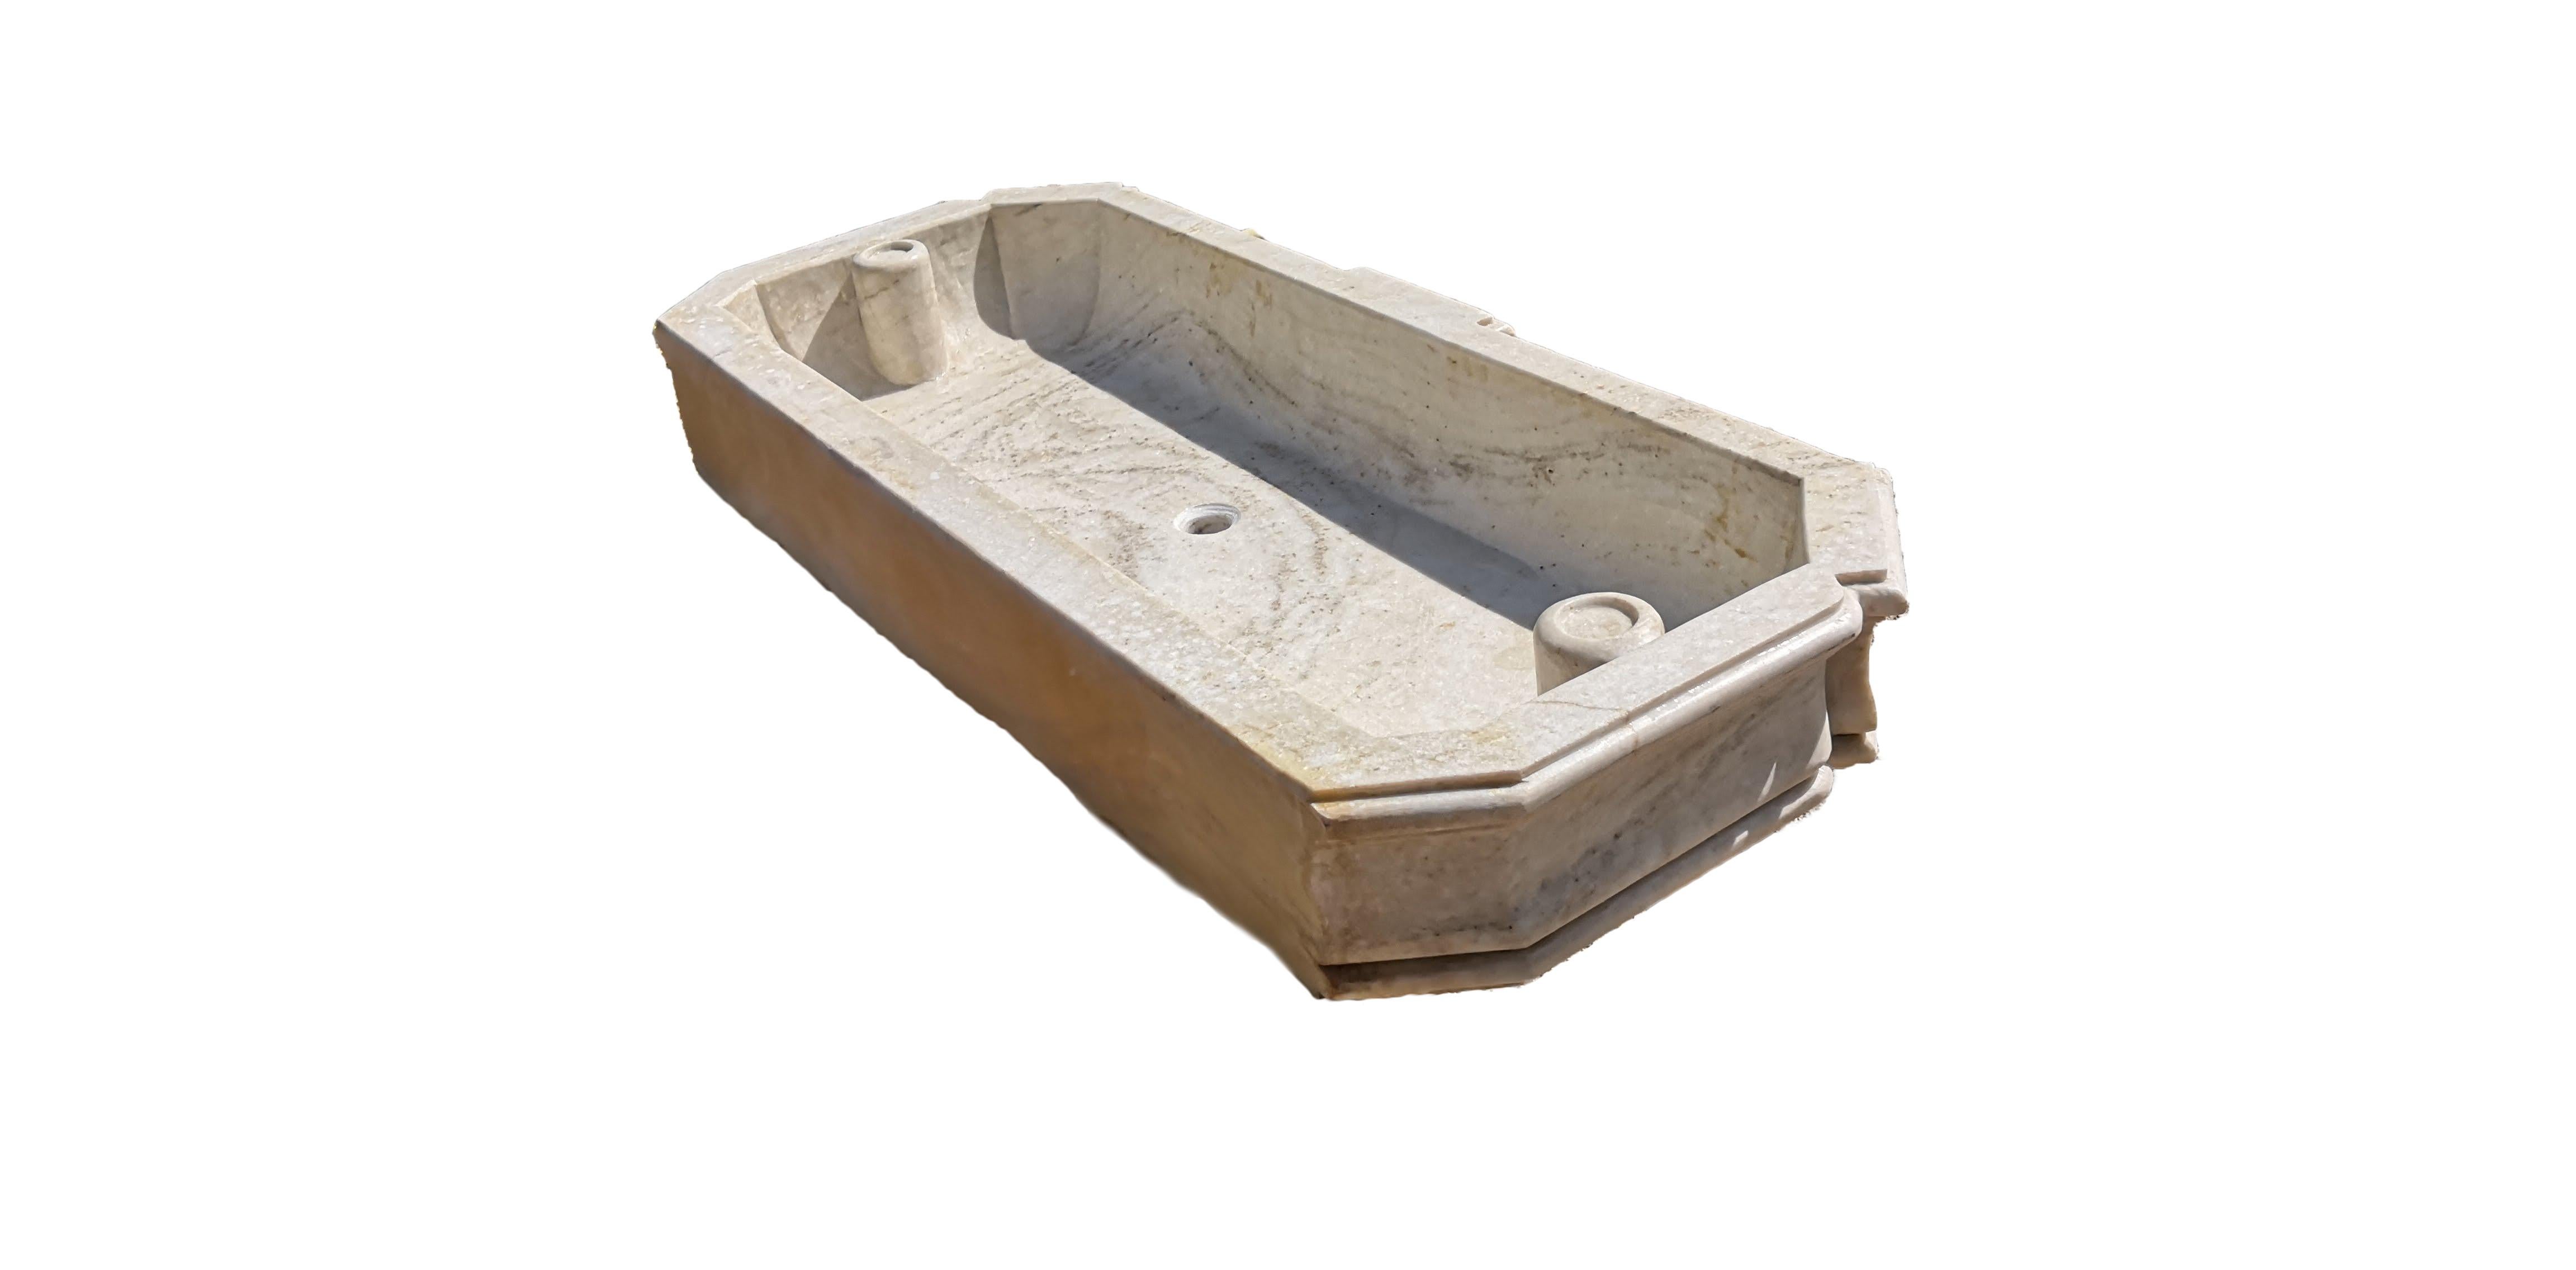 Carrara Marble Bathroom Kitchen Sink Basin In Good Condition For Sale In Cranbrook, Kent